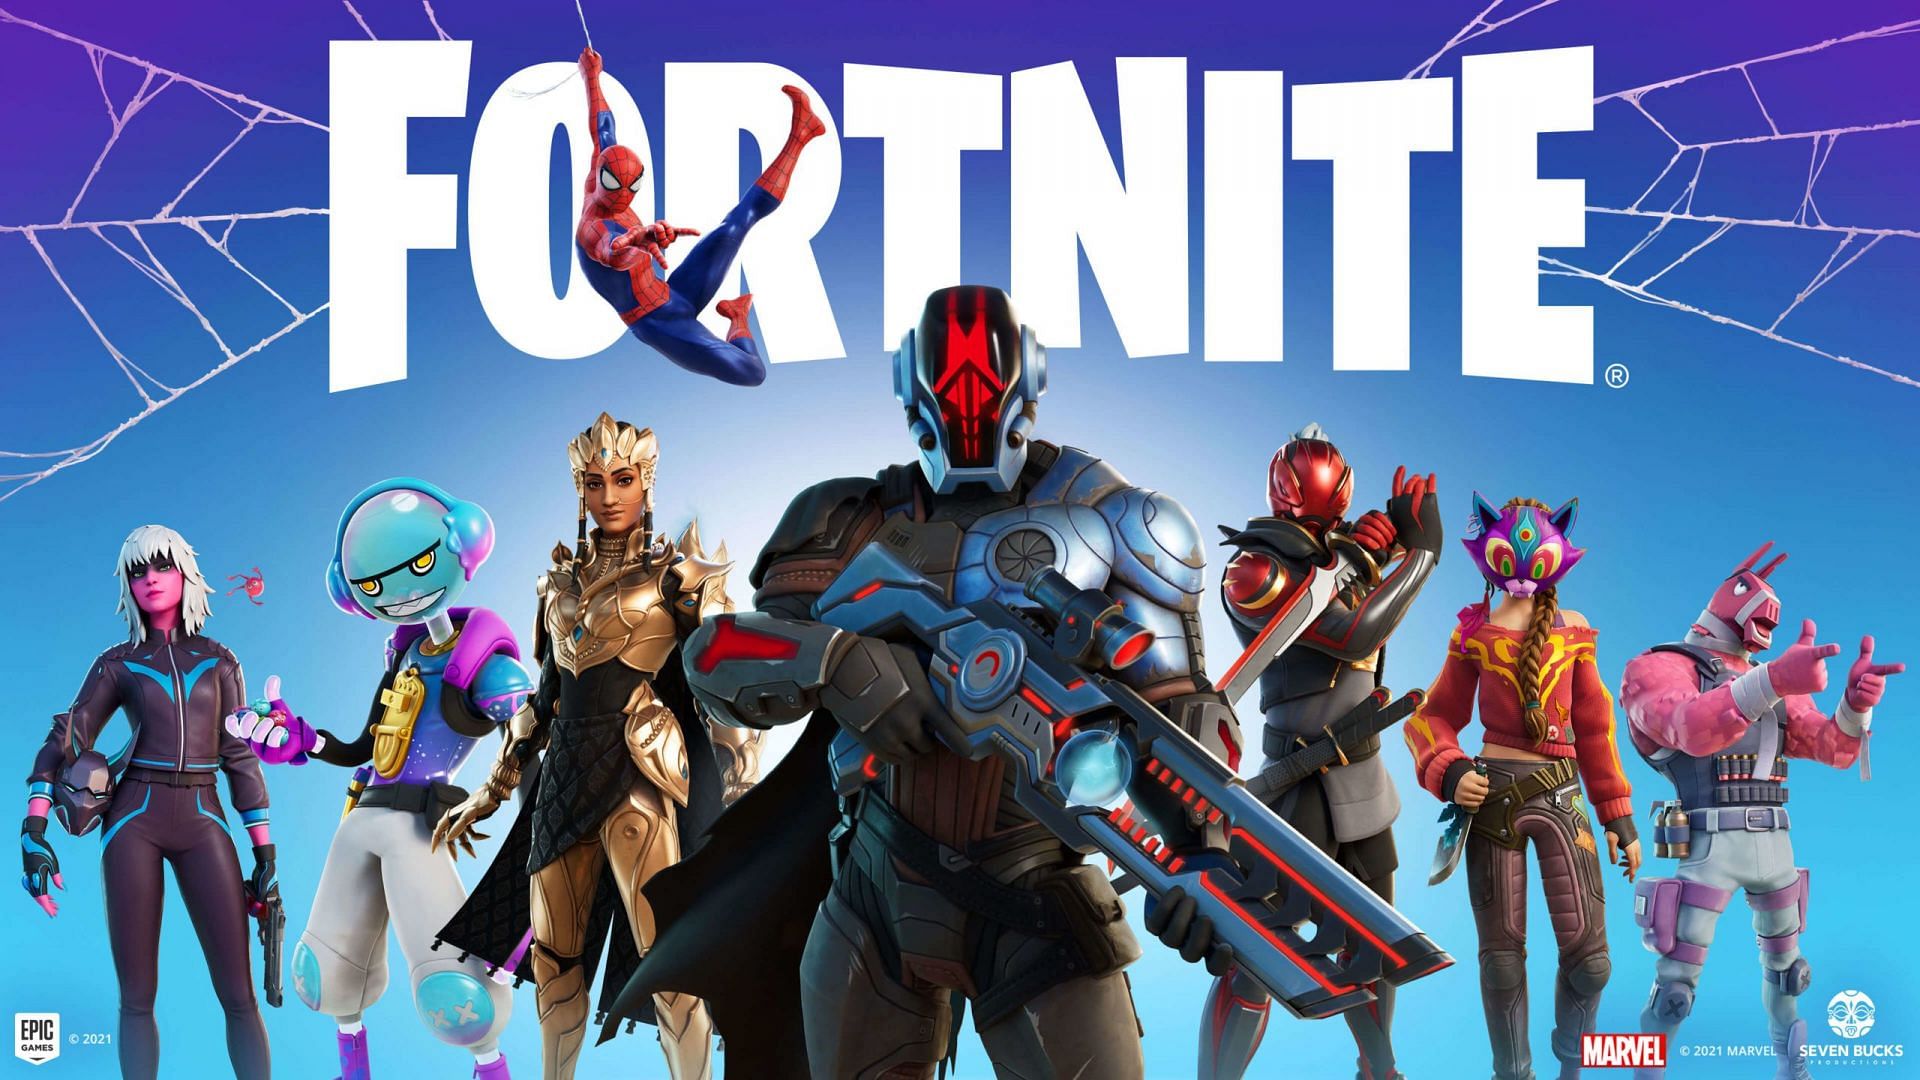 The Fortnite community wants to know how much they have left in Chapter 3 Season 2 to complete the Battle Pass before the next season drops (Image via Epic Games)